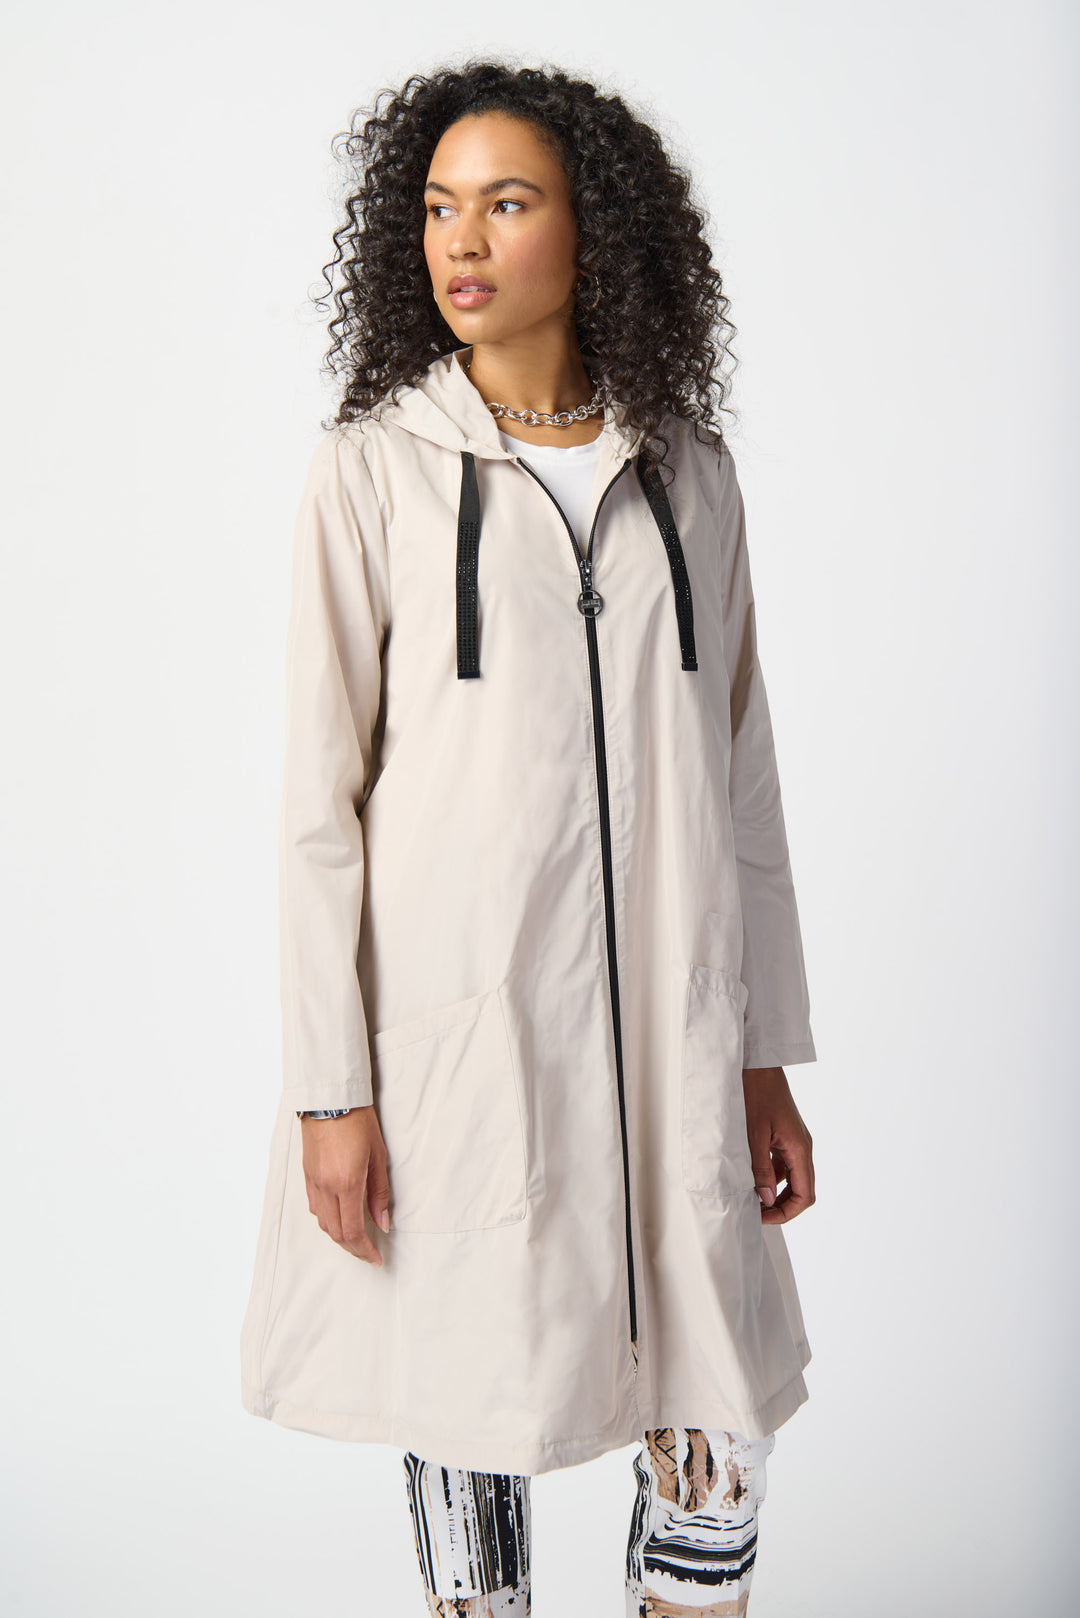 Joseph Ribkoff Spring 2024 a classic, modern and sleek design that combines fashion and function. This long coat features a drawstring hood and full front zipper for added warmth and style. 